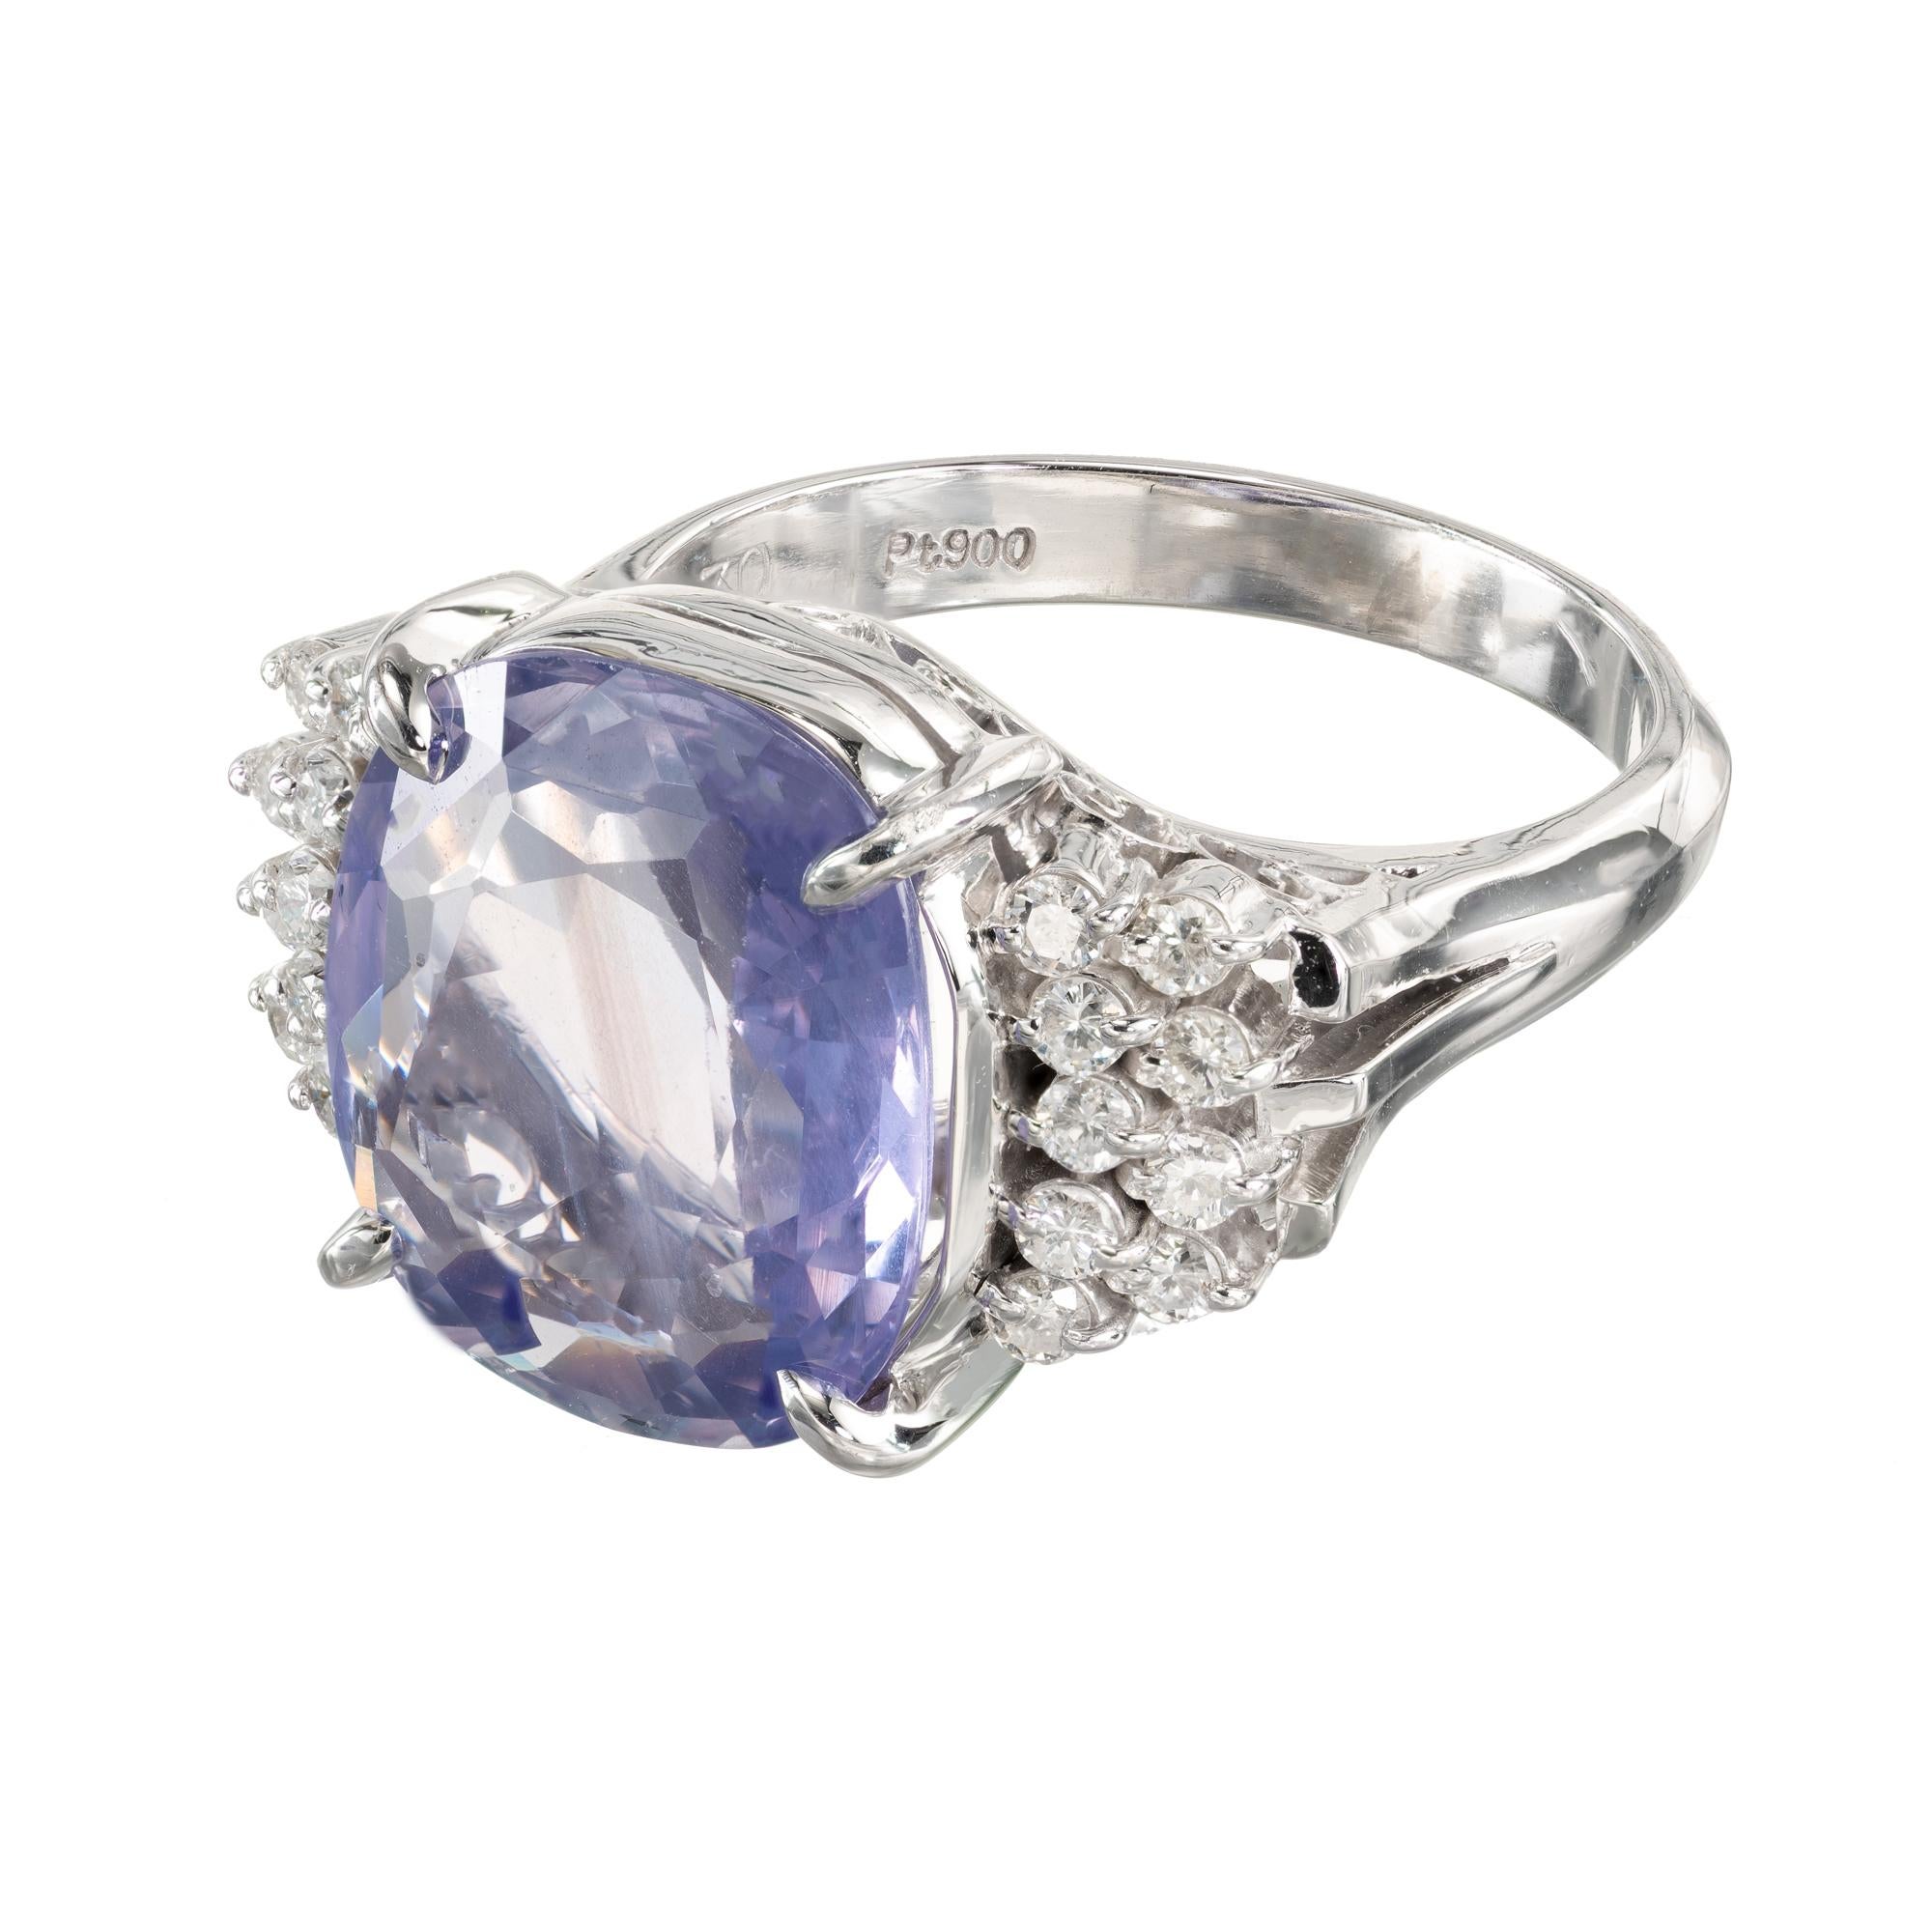 GIA Certified 6.40 Carat Color Change Sapphire Diamond Platinum Ring In Excellent Condition For Sale In Stamford, CT